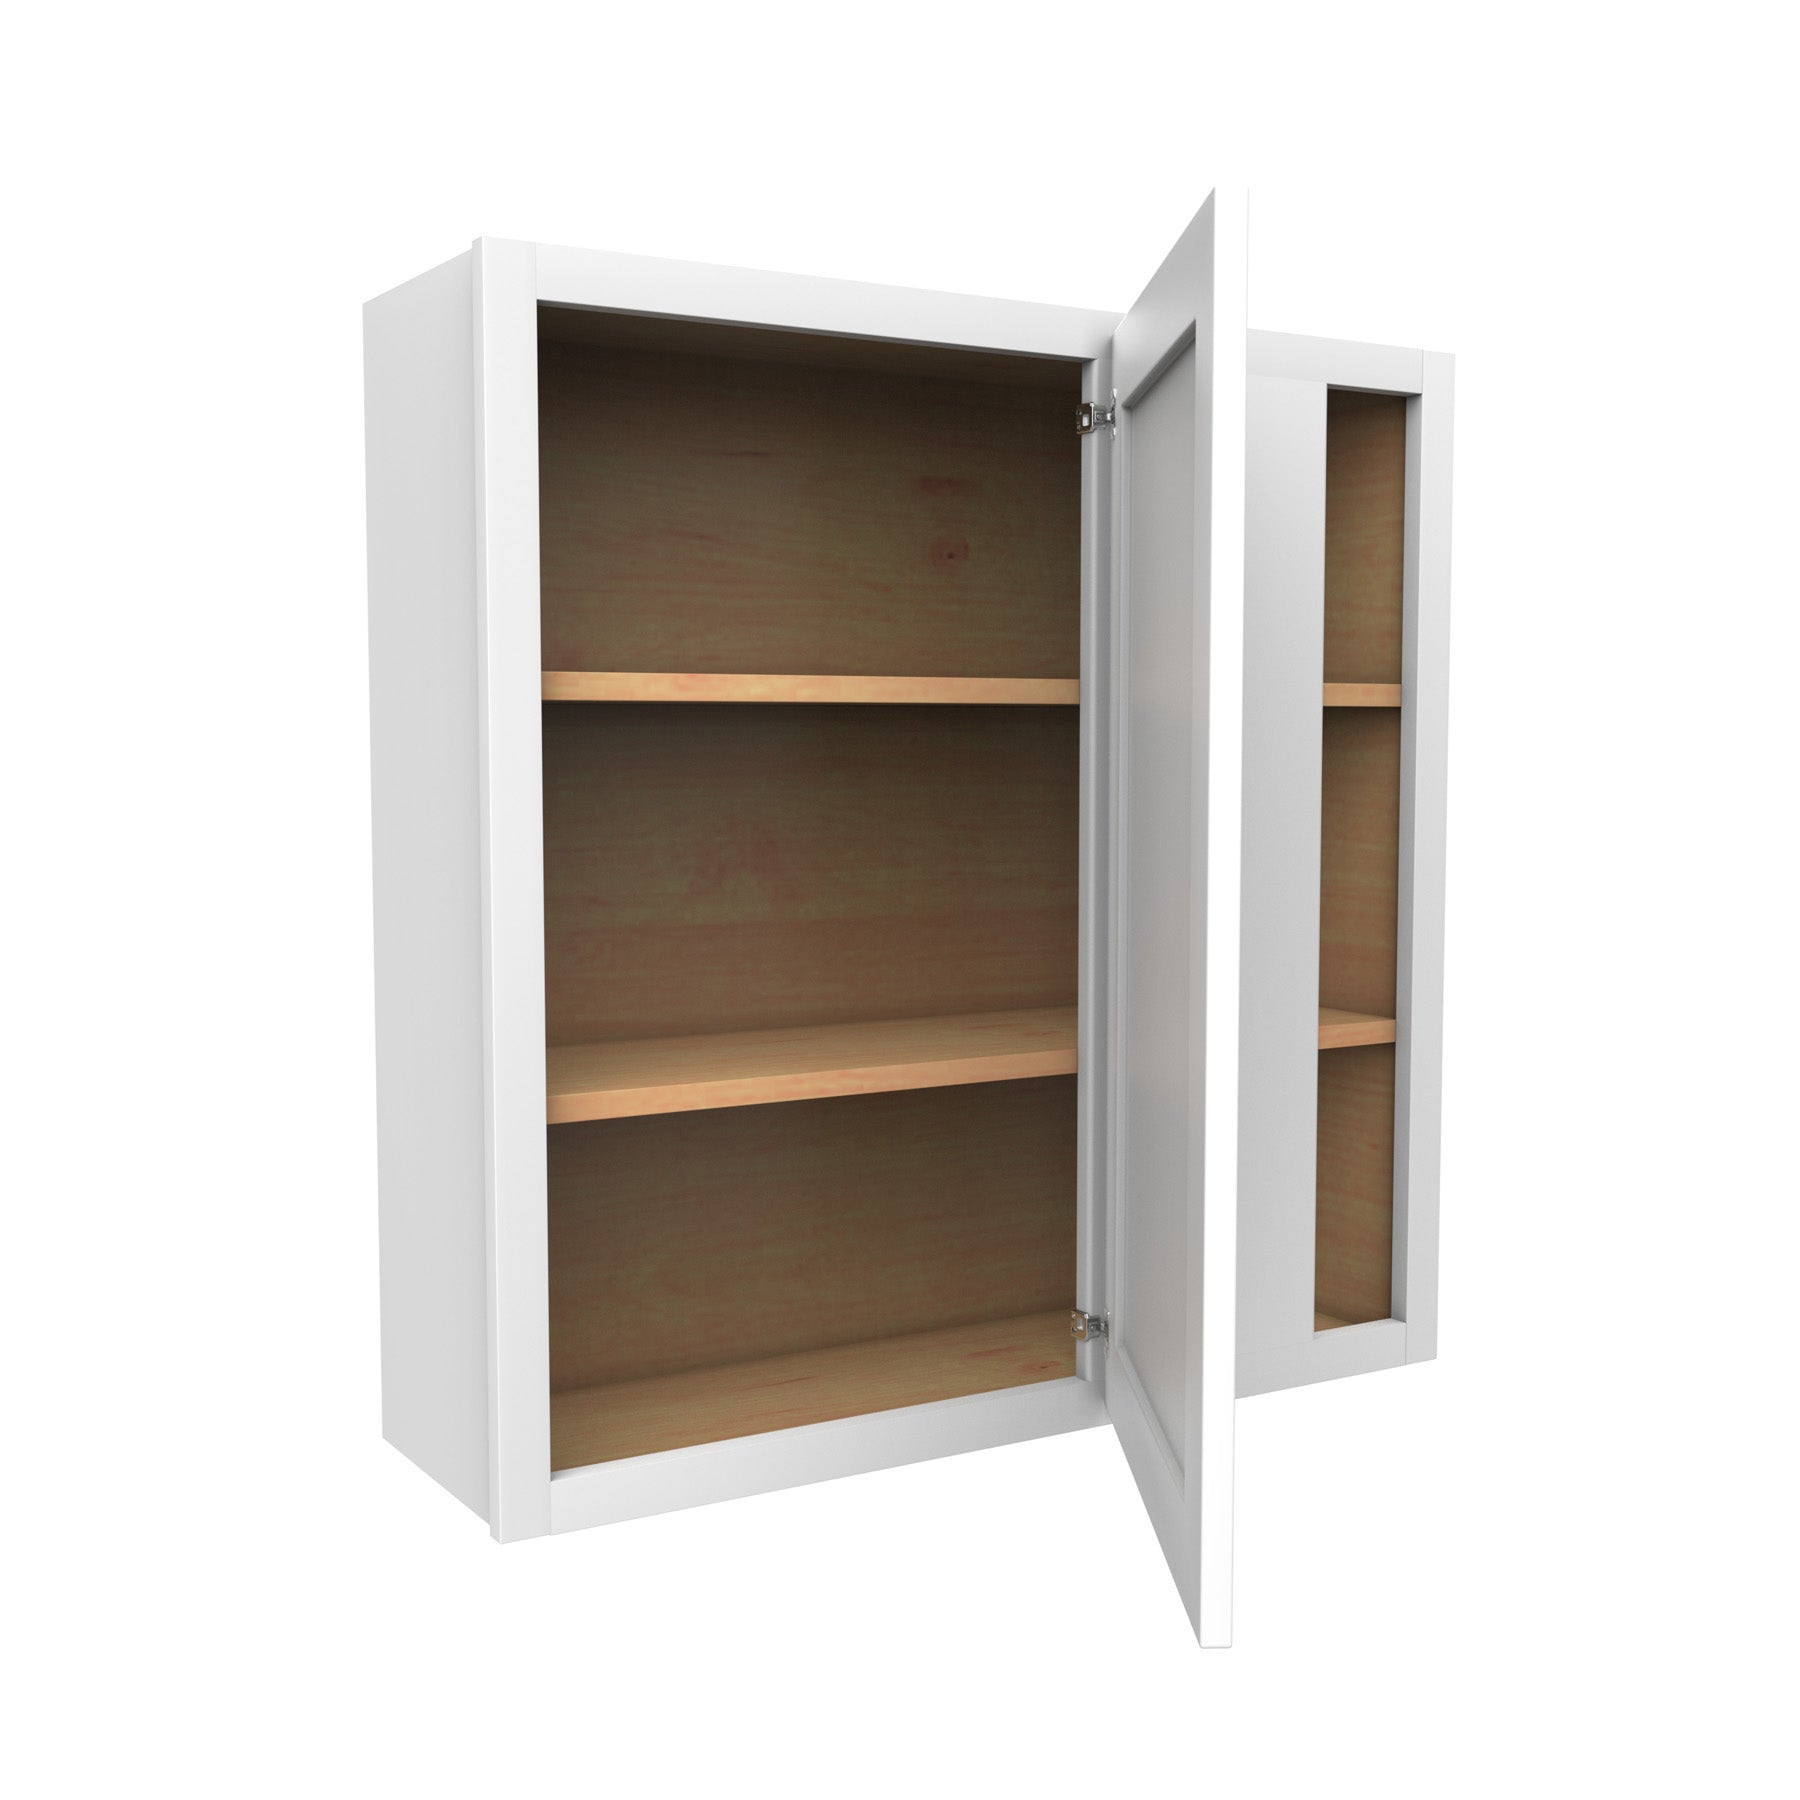 36 Inch High Blind Wall Cabinet - Luxor White Shaker - Ready To Assemble, 36"W x 36"H x 12"D